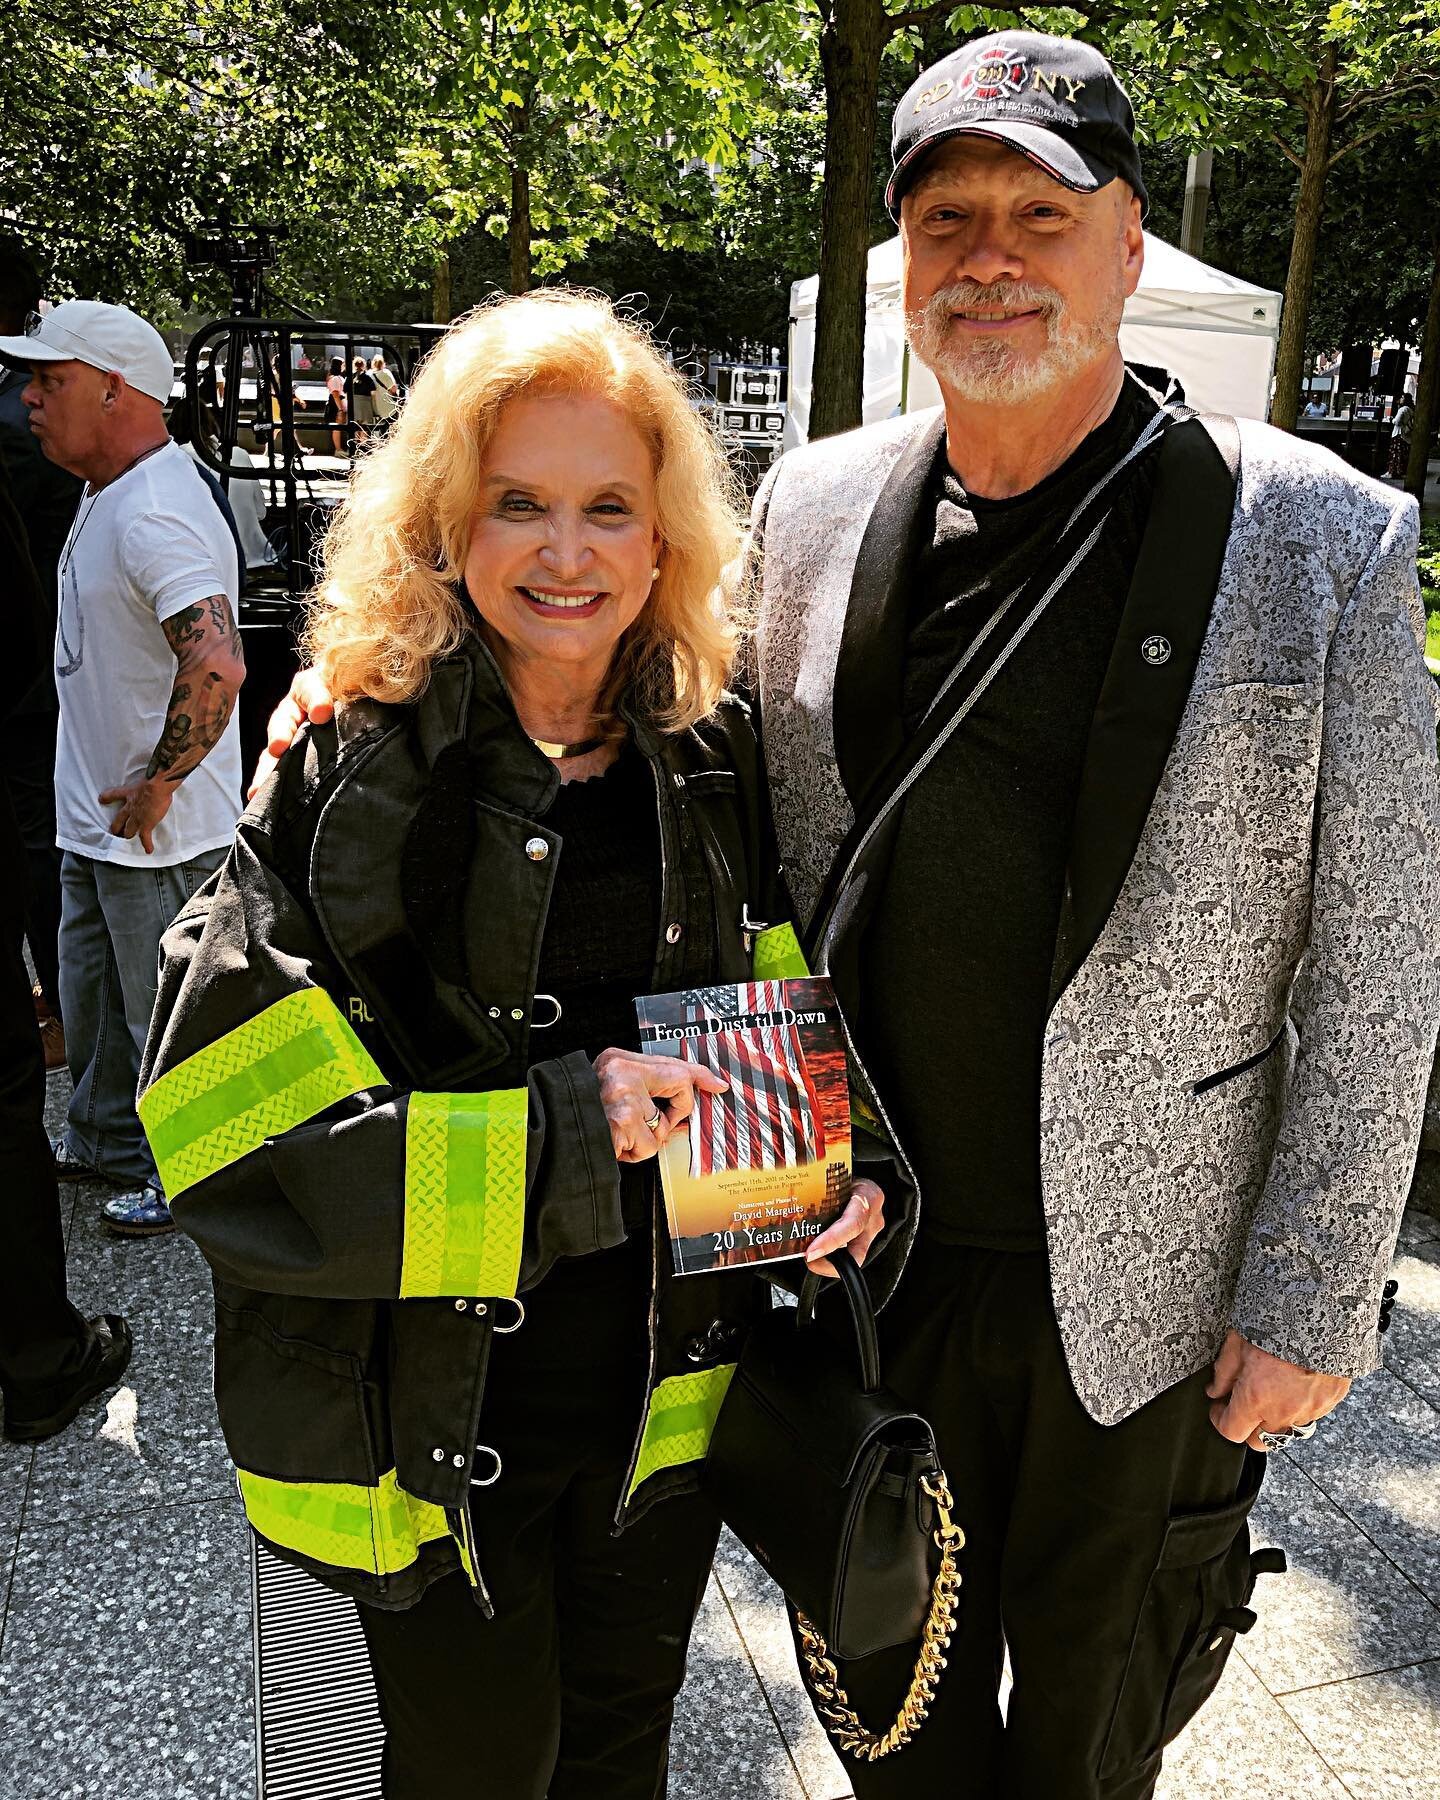 With one of favorite people Hon. Carolyn Maloney 20th anniversary of the closing ceremony 5/30/02  #wtcclosingday #wtc #wtcmemorial #september11 #september11memorial #carolynmaloney